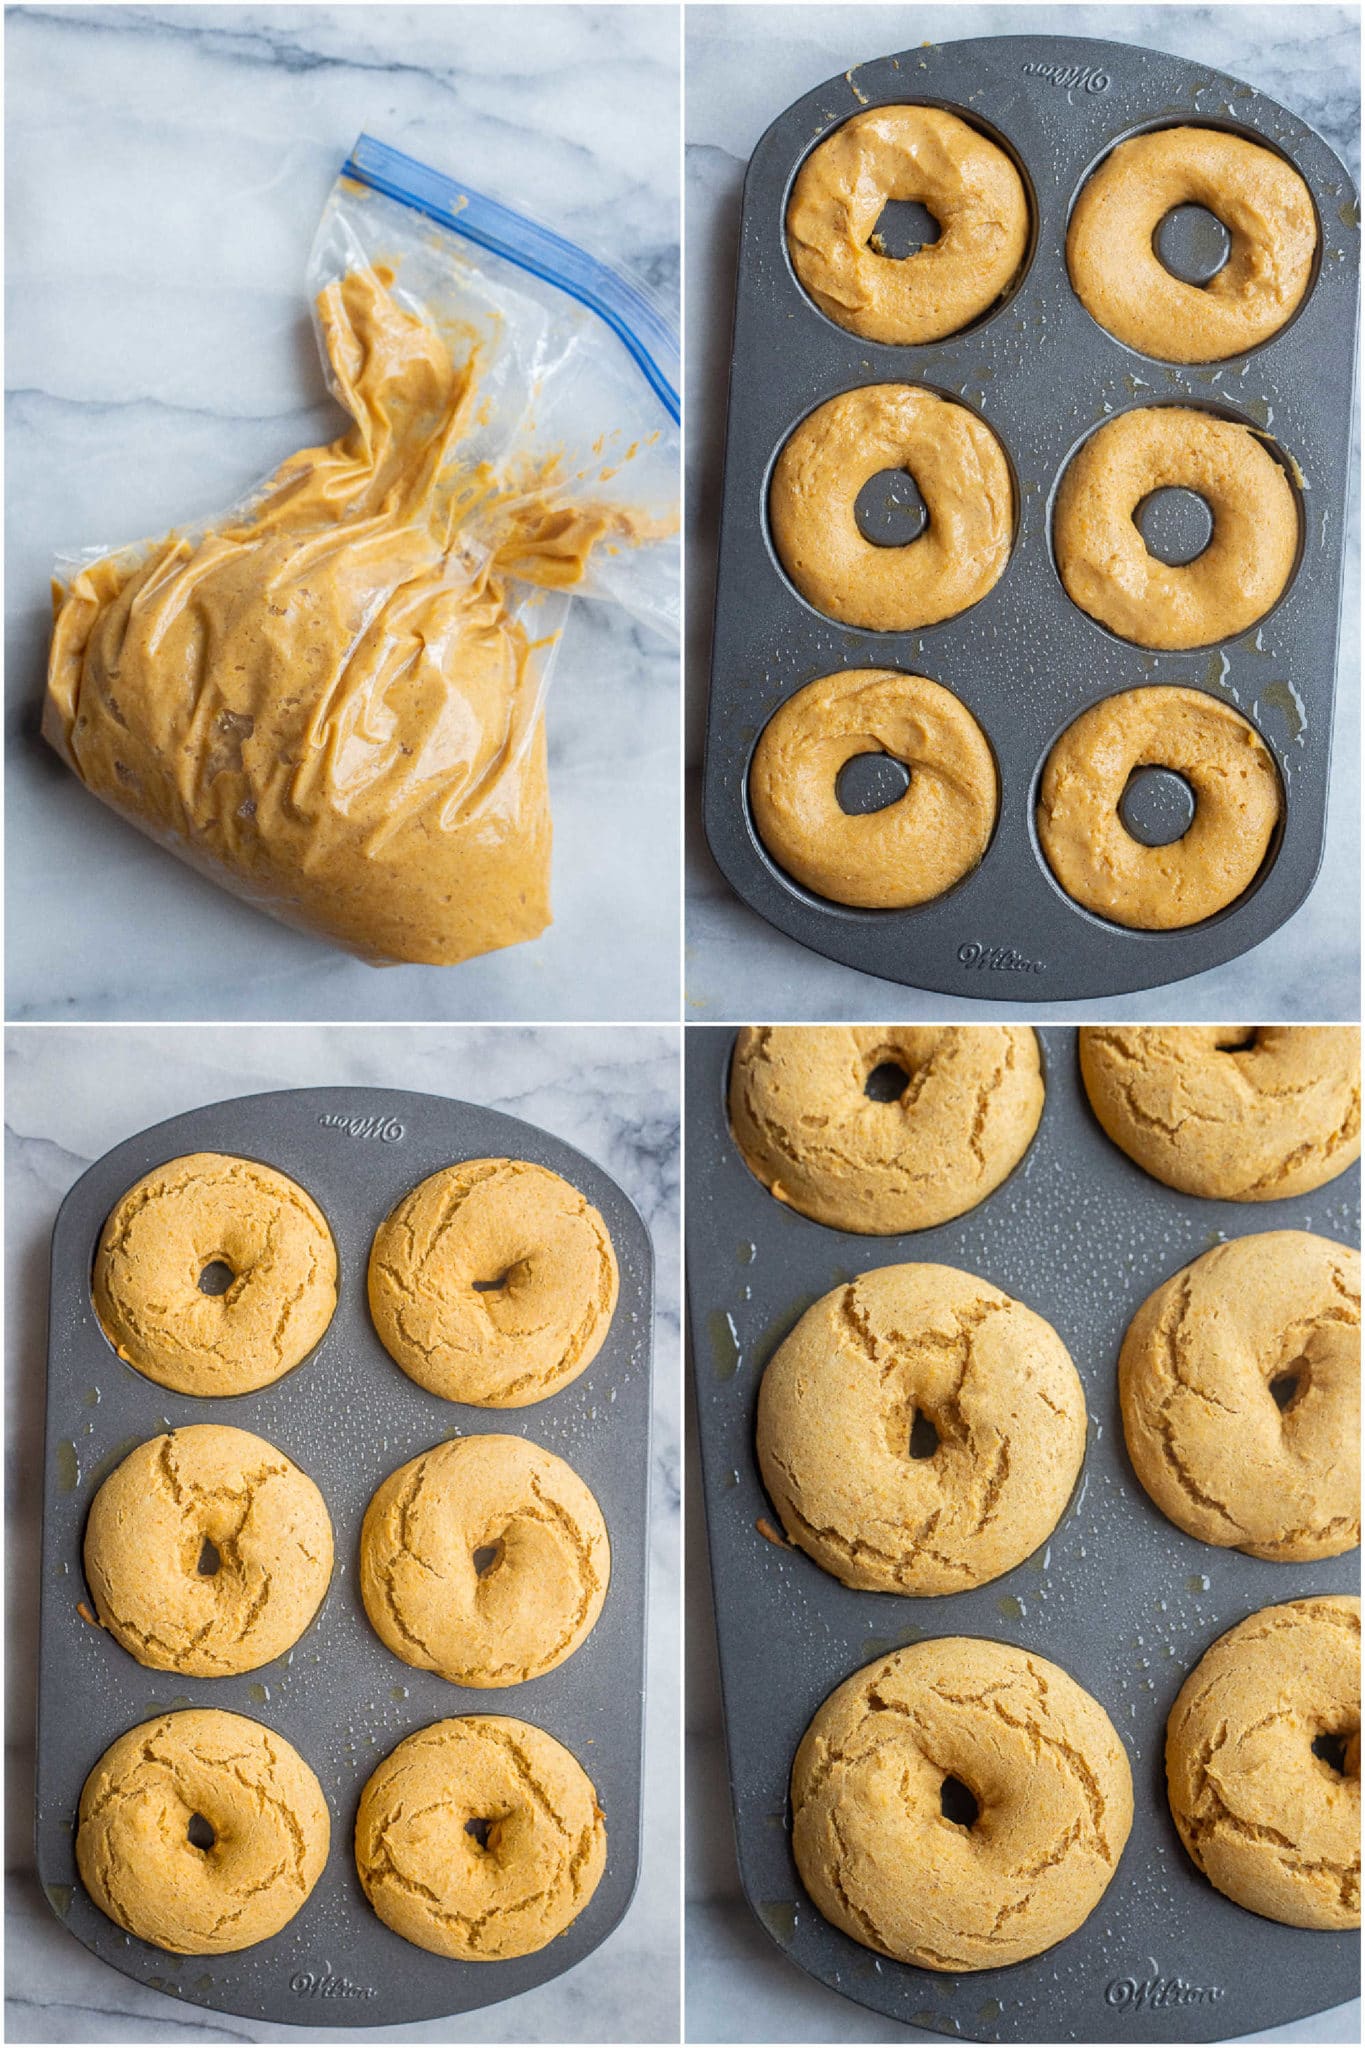 showing how to put the dough into the doughnut pan and bake them